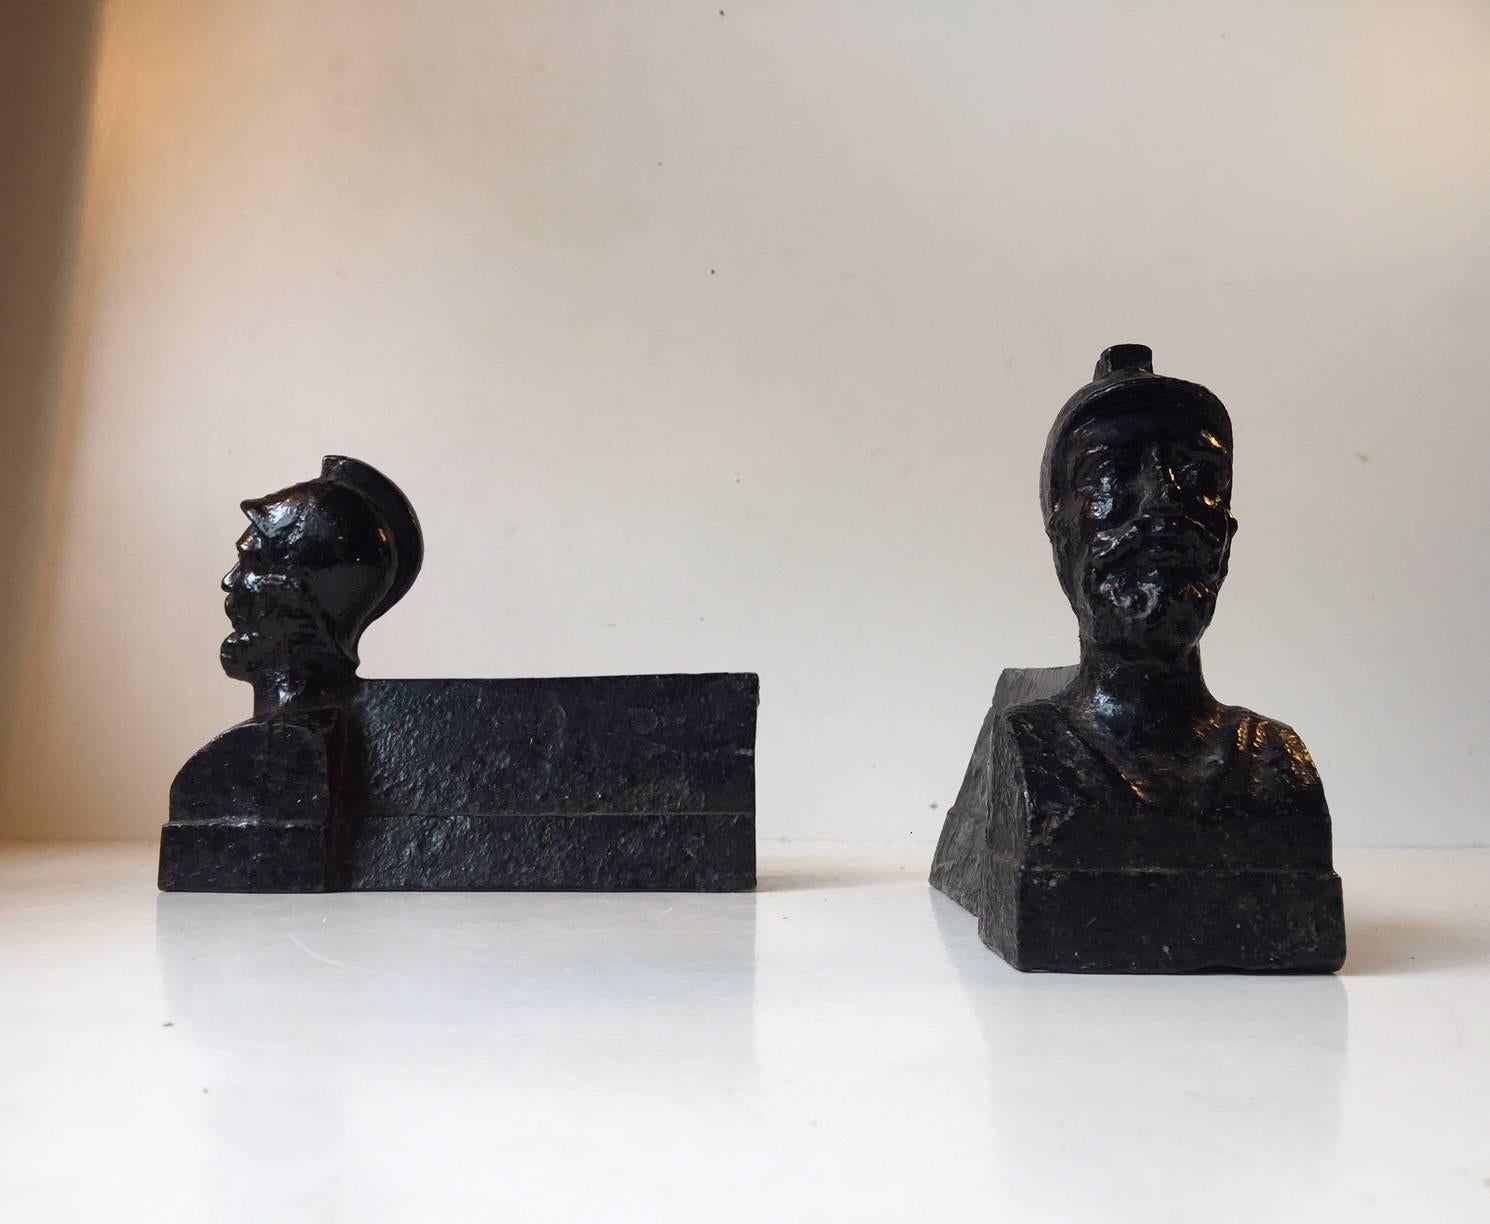 A pair of antique chenets or firedogs cast with a head and shoulders bust of a military Generals, with a straight, pyramidal billet bar. With their relatively small scale they could be adapted for other decorative uses in the home such as bookends.